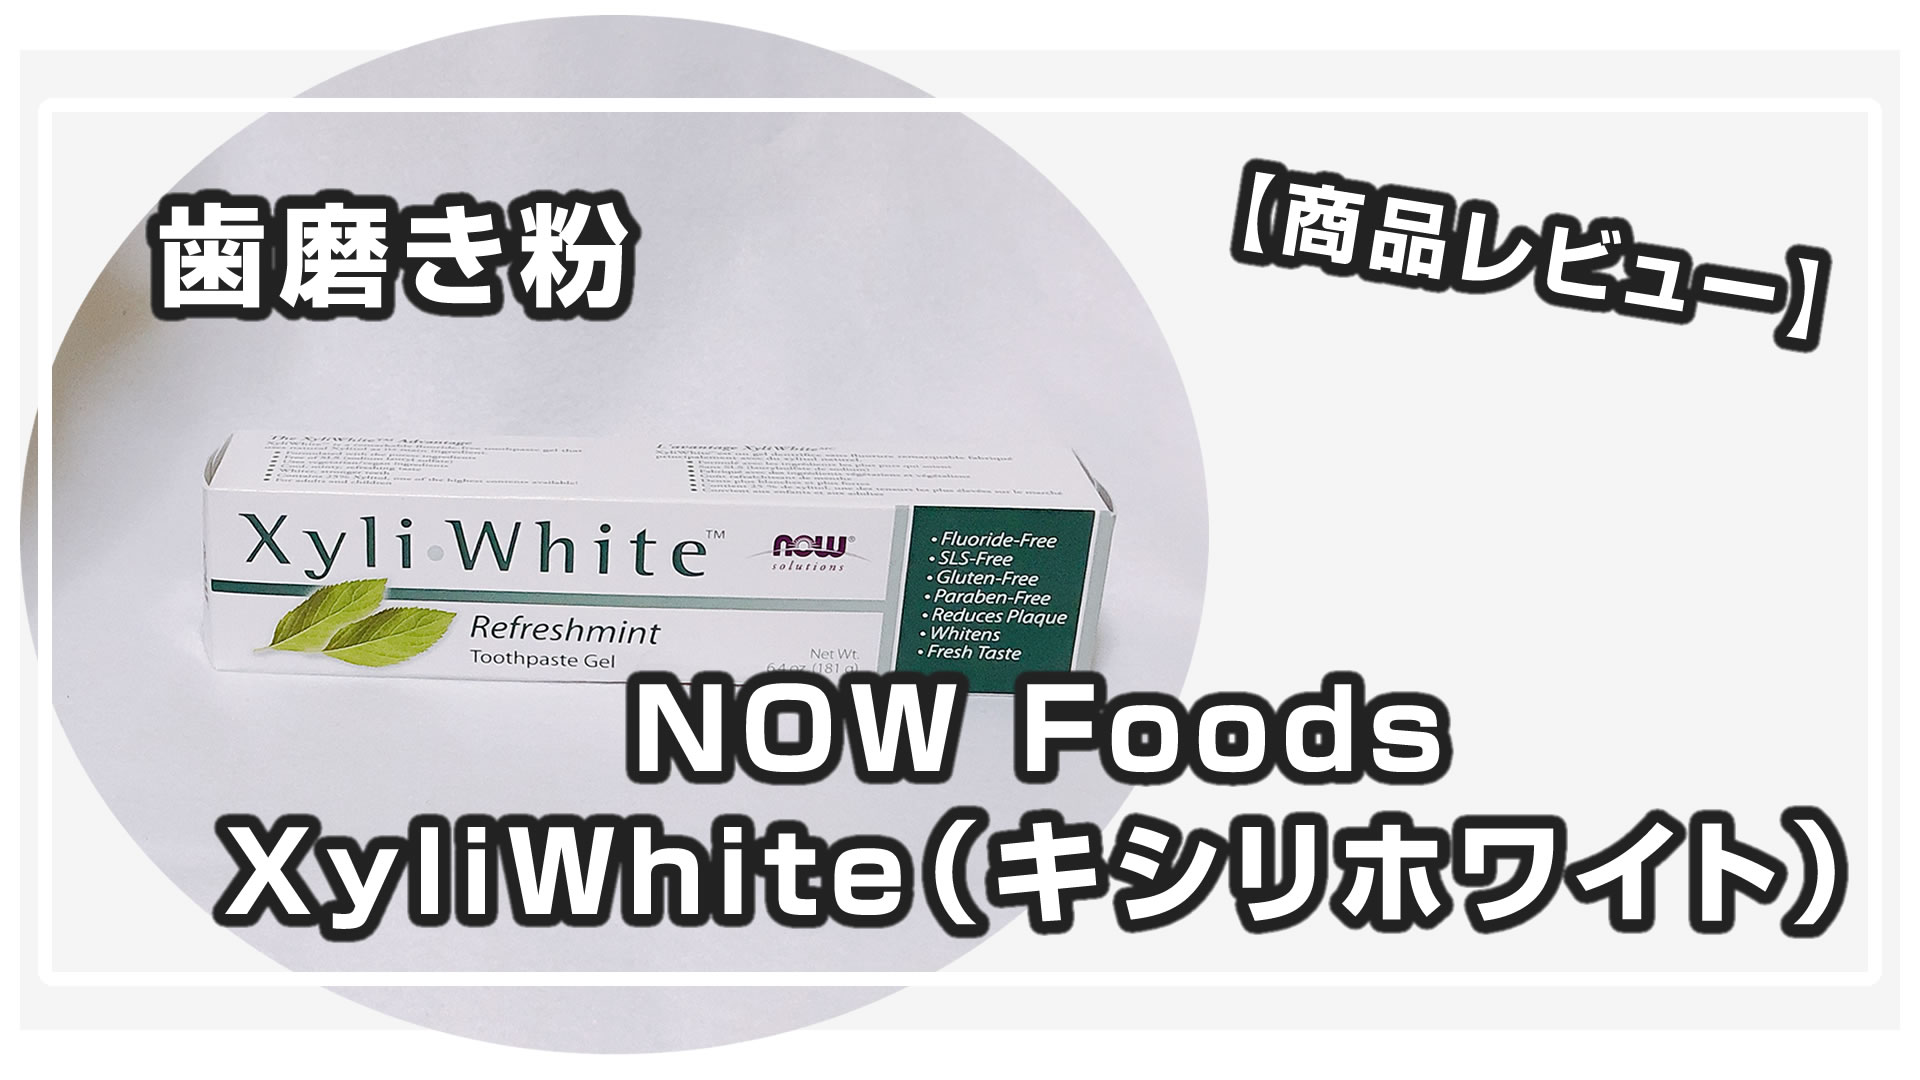 NOW Foods XyliWhite（キシリホワイト）歯磨き粉（ジェル）の口コミ・レビュー